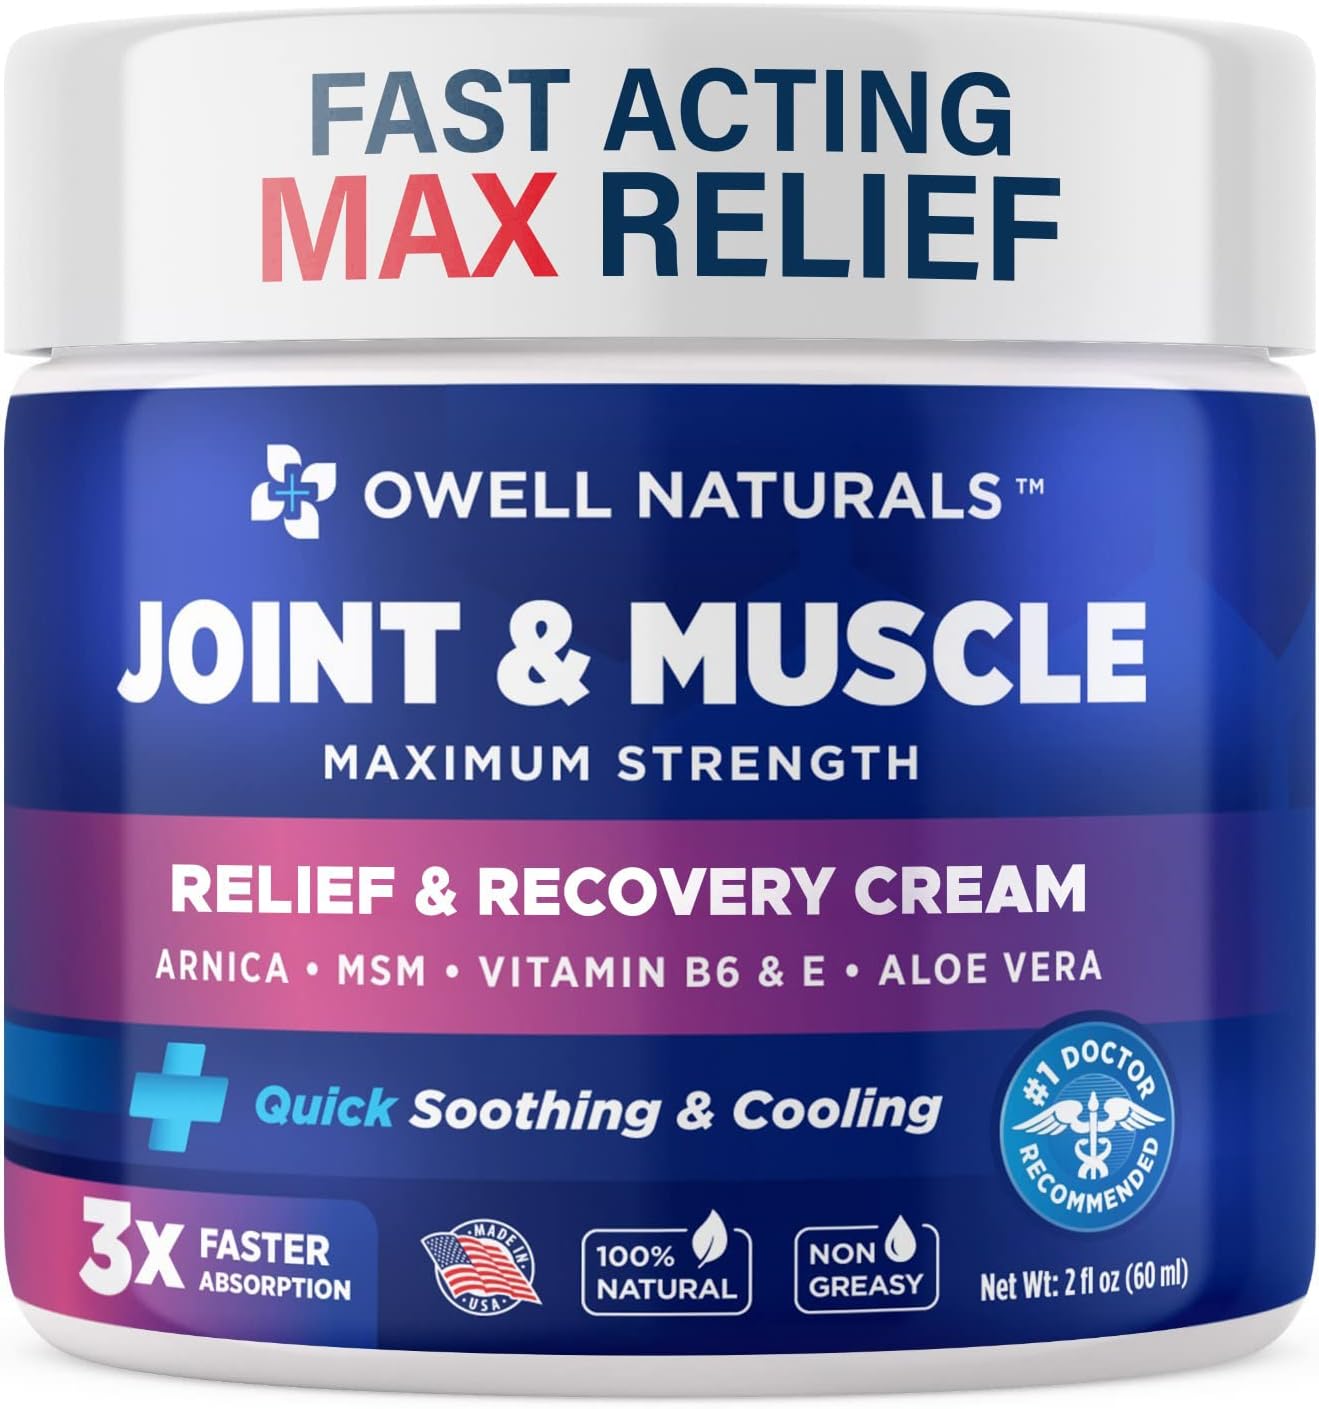 OWELL NATURALS Joint & Muscle Therapy Cream - All-Natural- Maximum Strength Relief & Recovery for Back, Neck, Hands, Feet, Shoulder - Fast-Acting, Non-Greasy, Made in USA